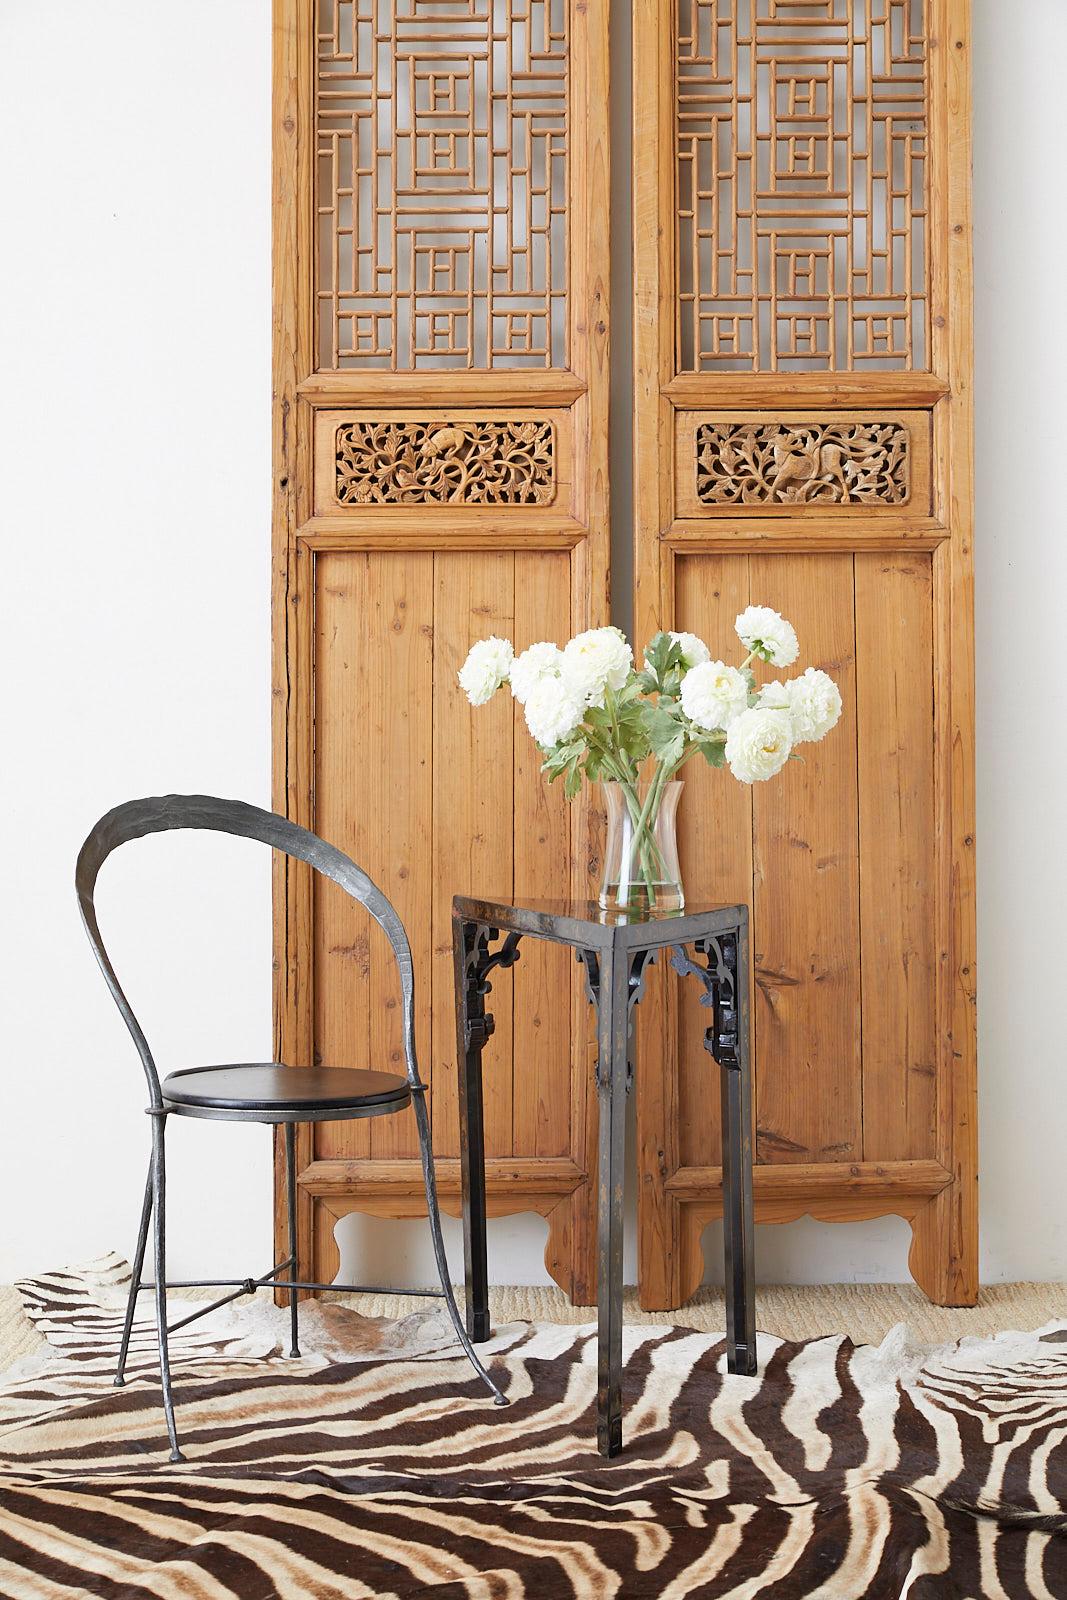 Distinctive pair of Chinese carved doors featuring an open fretwork design lattice panel windows. The thick frames have an old world mortise and tenon joinery. Standing over 9.5 feet tall and 20.5 inches wide. Decorated with foliate motif inserts on